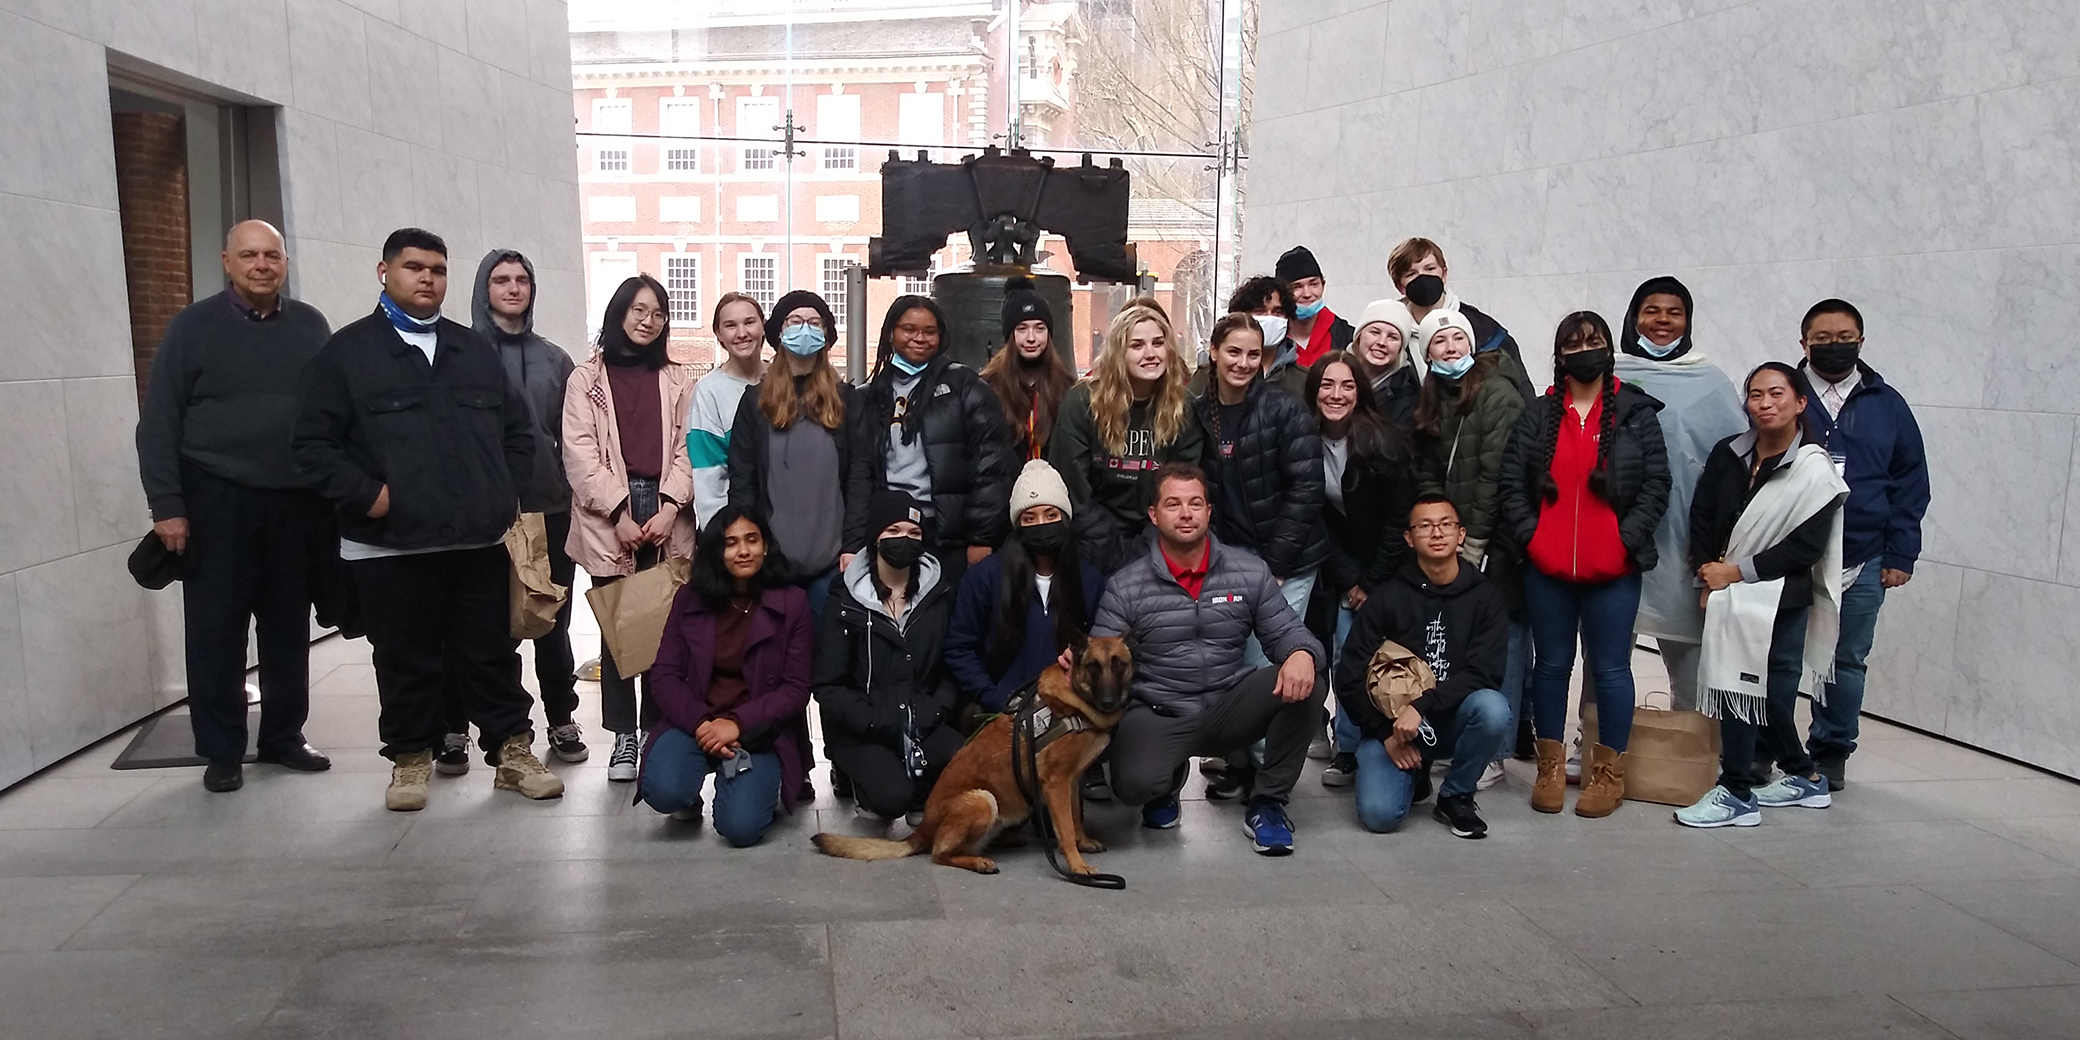 Student group picture at the Liberty Bell Philadelphia